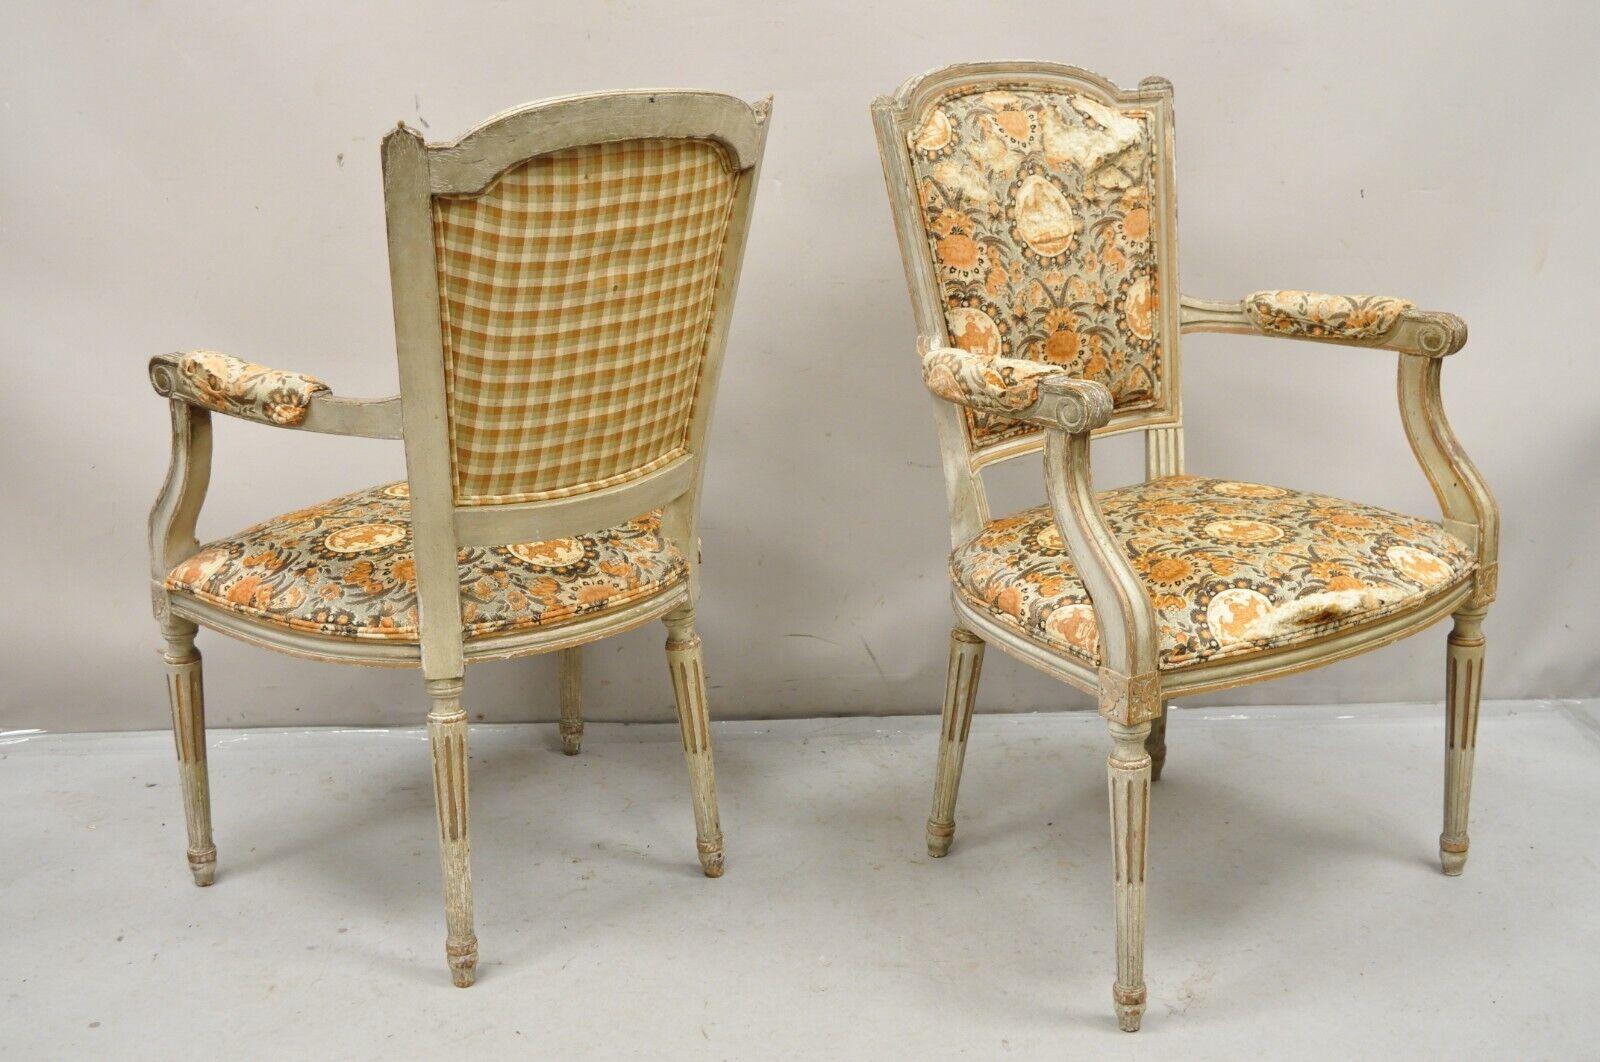 Antique French Louis XVI Style Distressed Cream Painted Fauteuil Arm Chairs Pair For Sale 5